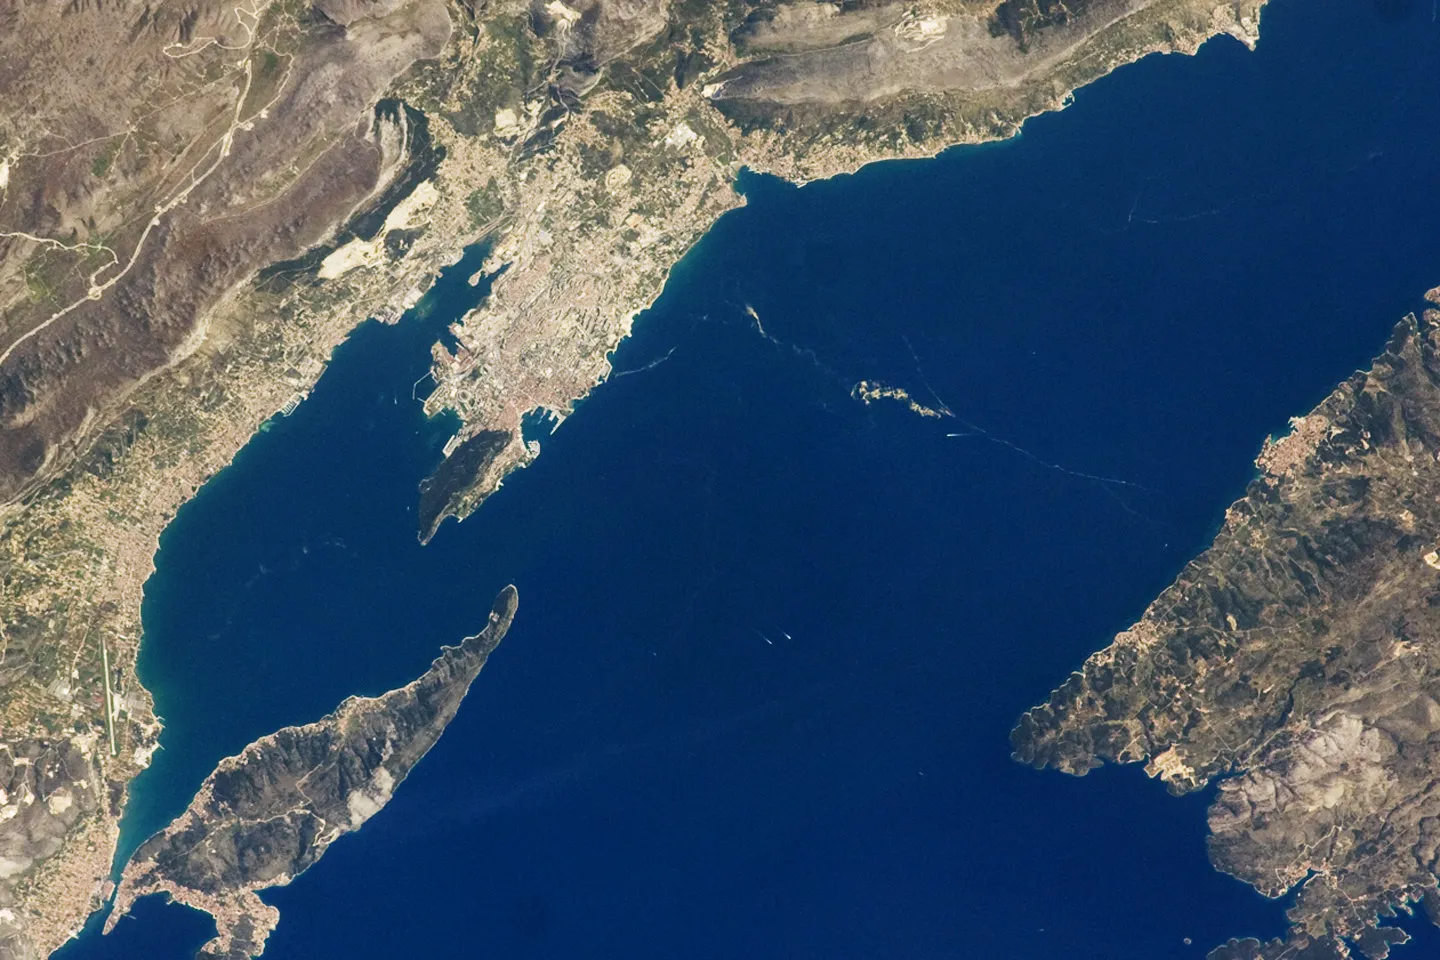 Photo showing: In this image, a thin zone of disturbed water (tan patches) marking a water boundary appears in the Adriatic Sea between Split and the island of Brač. It may be a plankton bloom or a line of convergence between water masses, which creates rougher water.